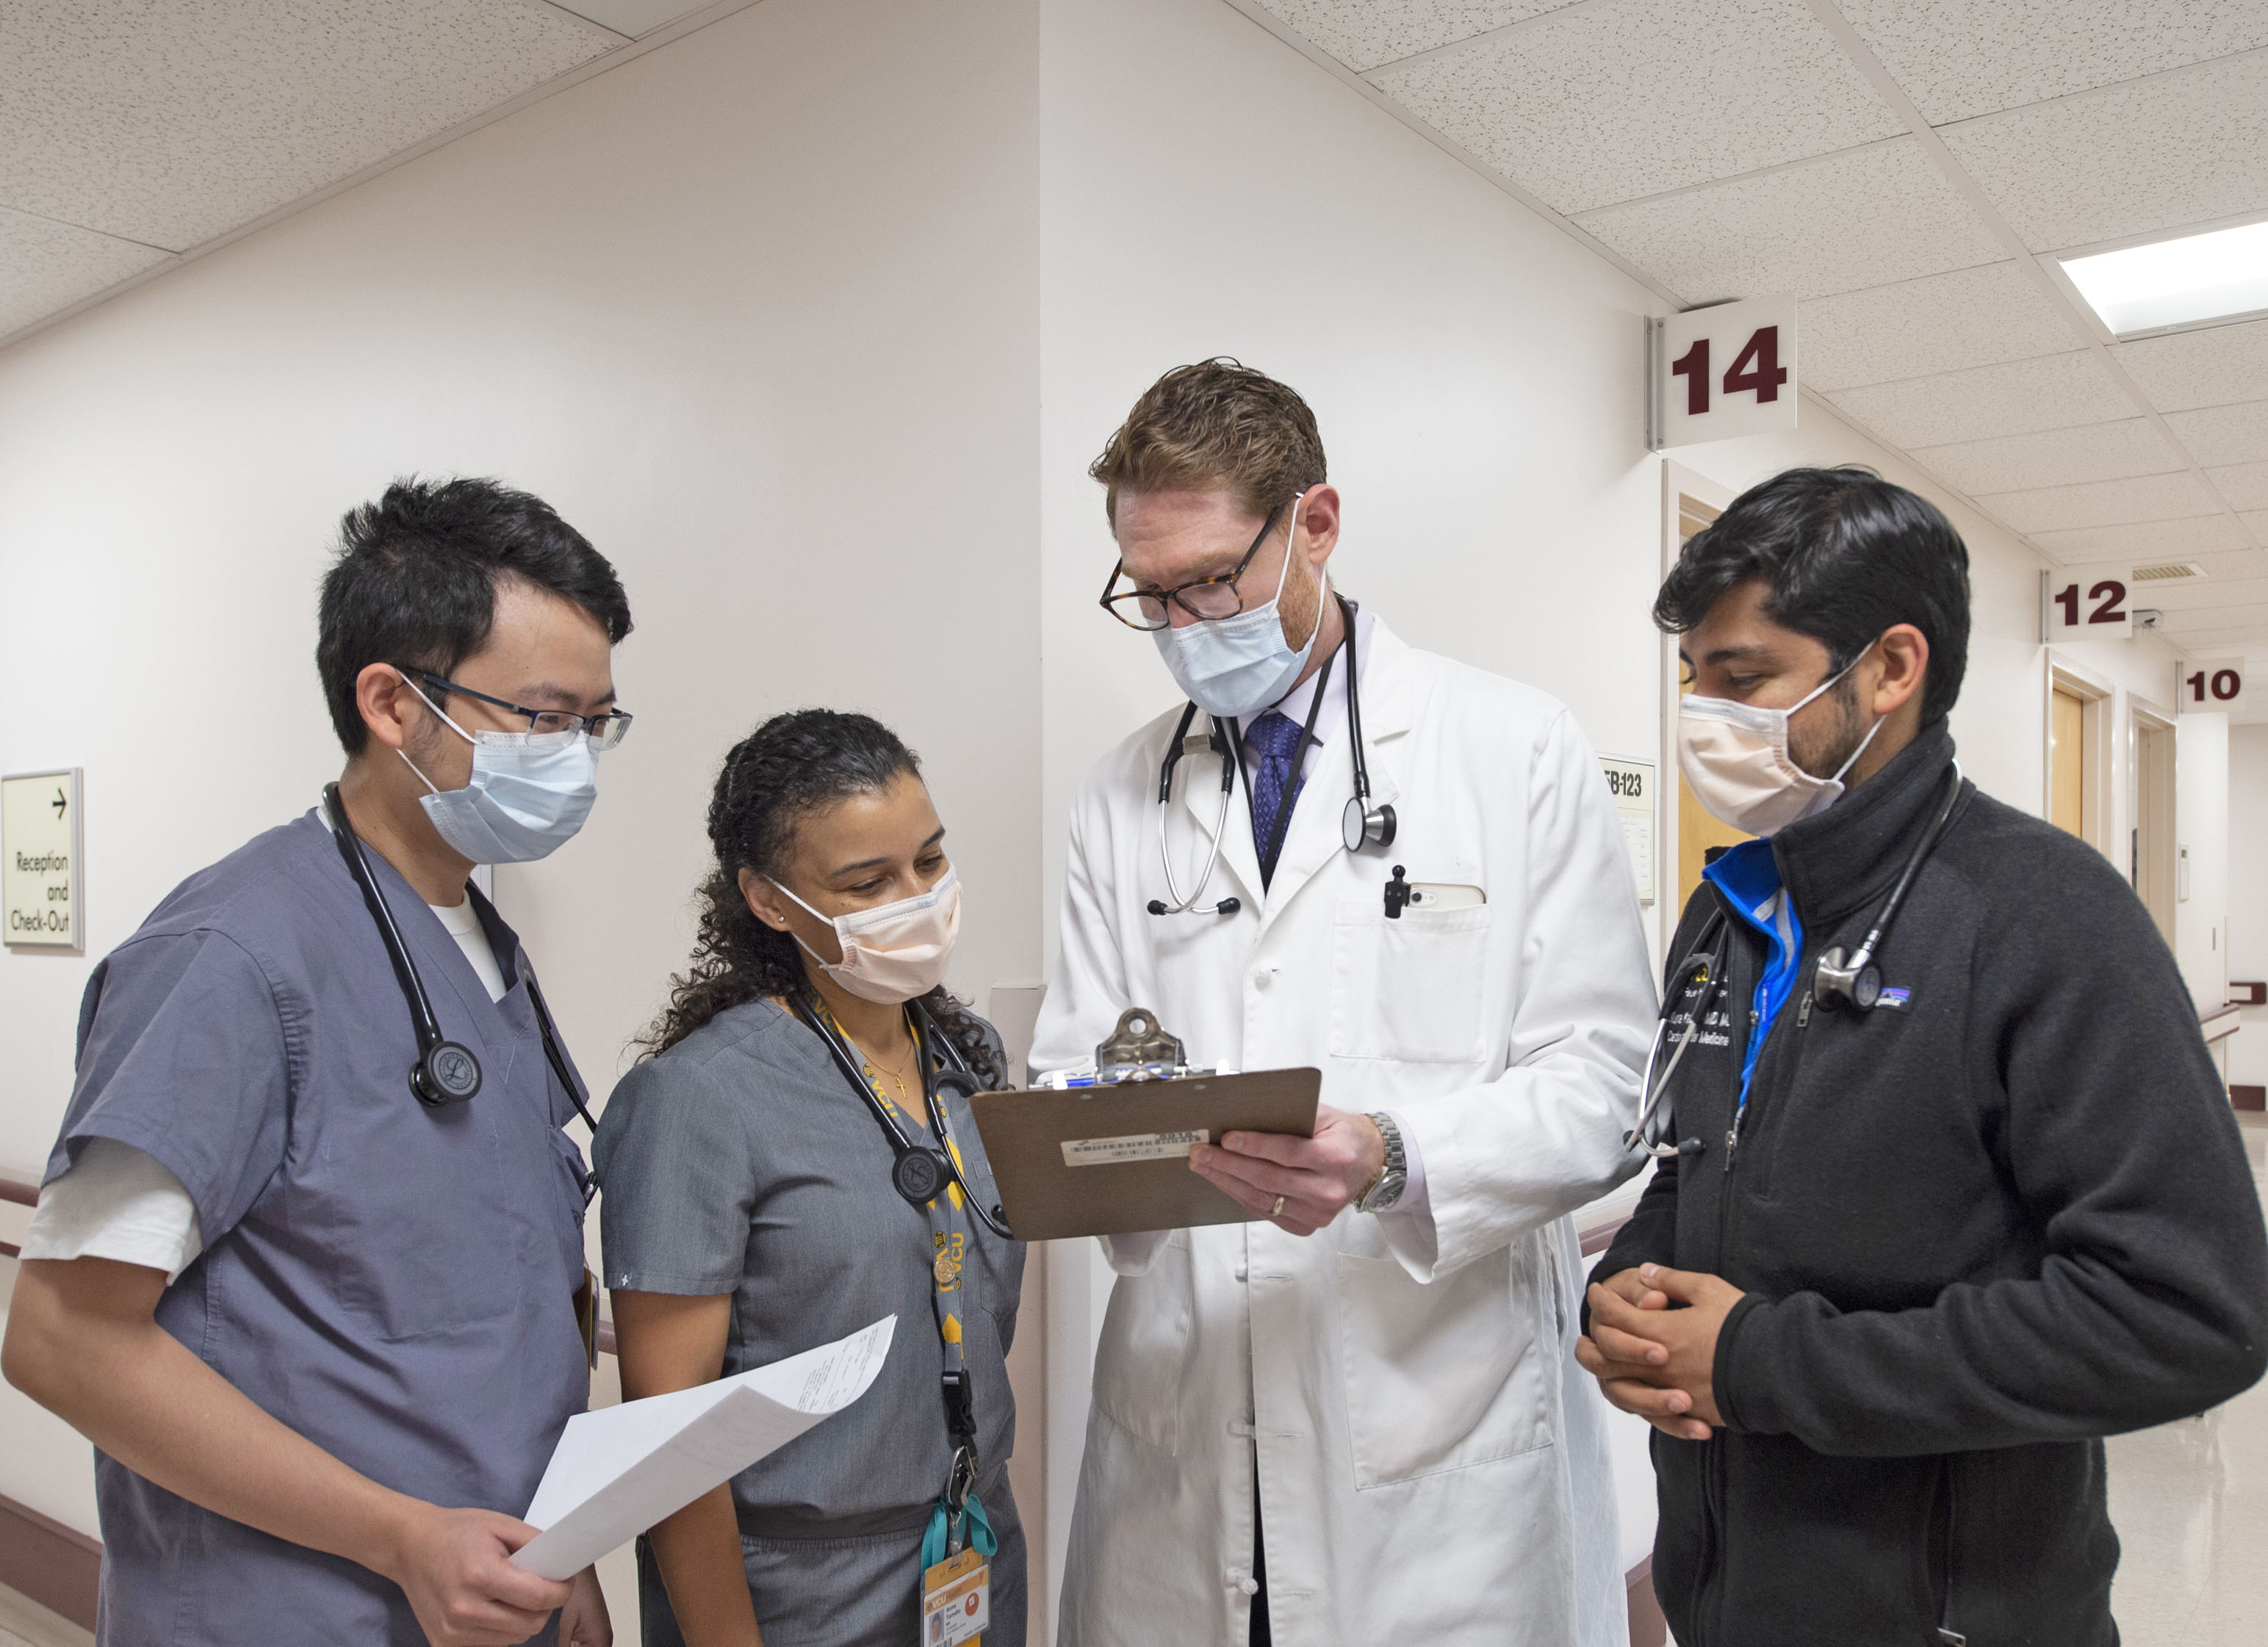 Jonah Pozen, M.D., VCU Health Pauley Heart Center assistant professor of medicine and Central Virginia VA Health Care System staff cardiologist, speaks with fellows Kunal Kapoor, M.D., Anna Tomdio, M.D., and Pengyang Li, M.D., as they review patients in the VA Cardiology subspeciality clinic.